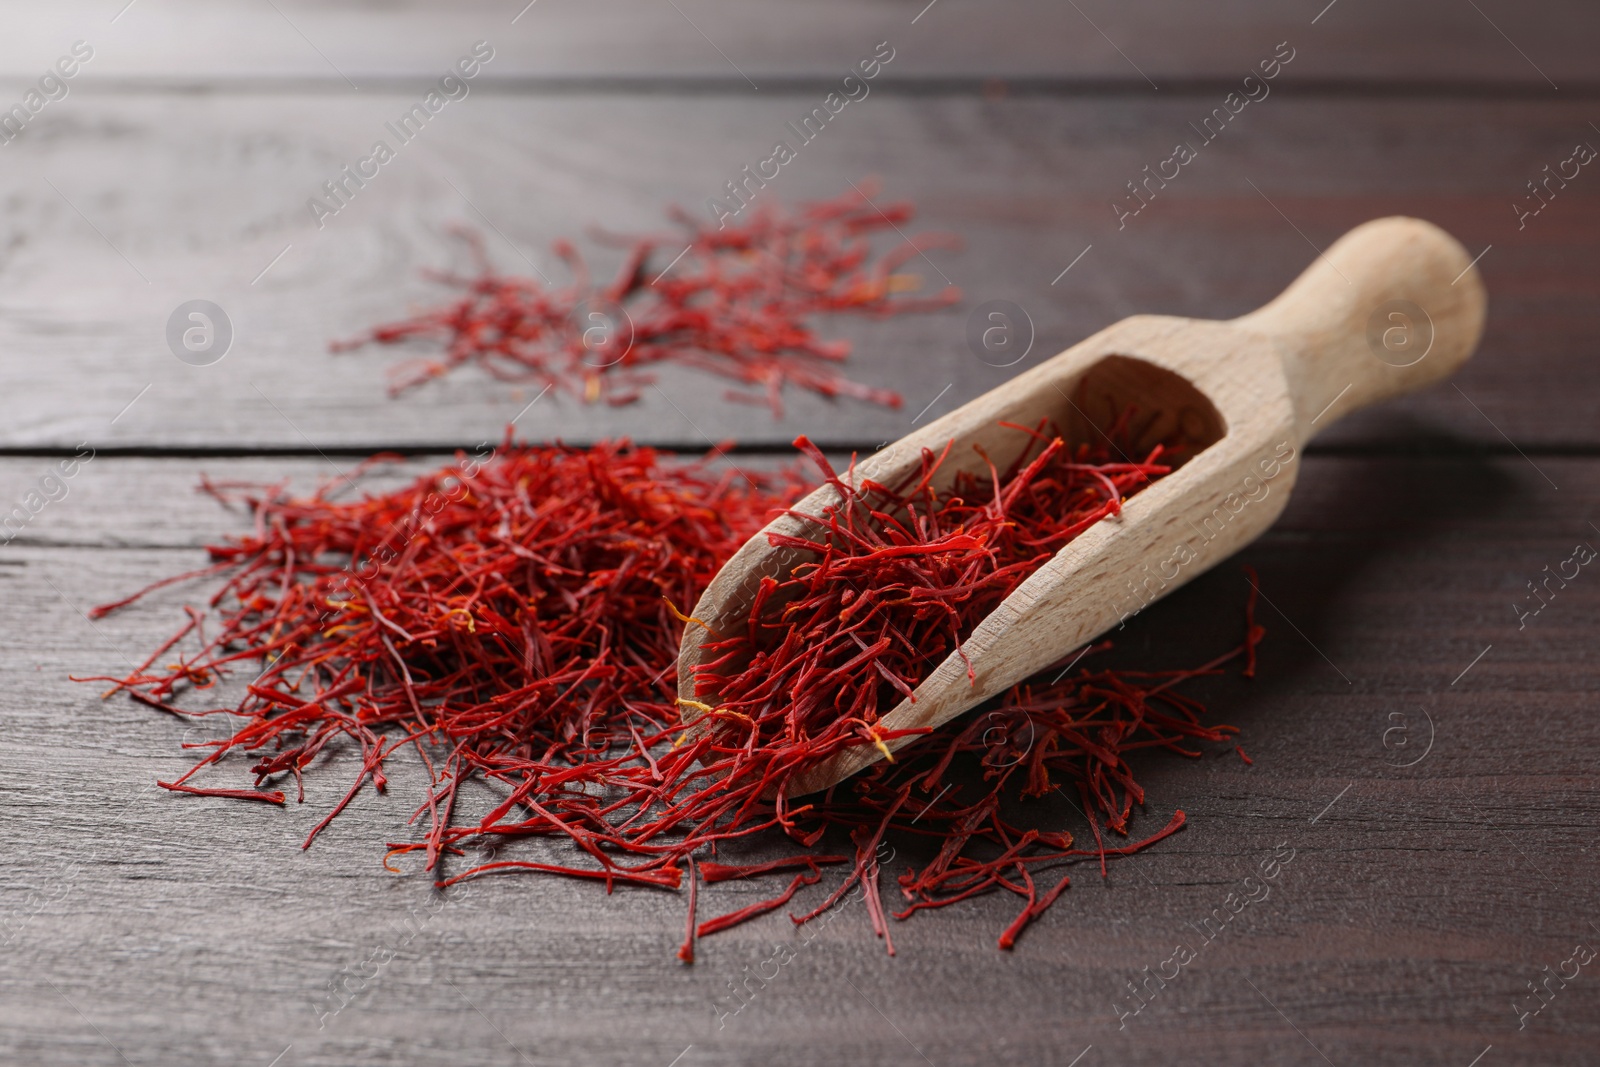 Photo of Dried saffron and scoop on wooden table